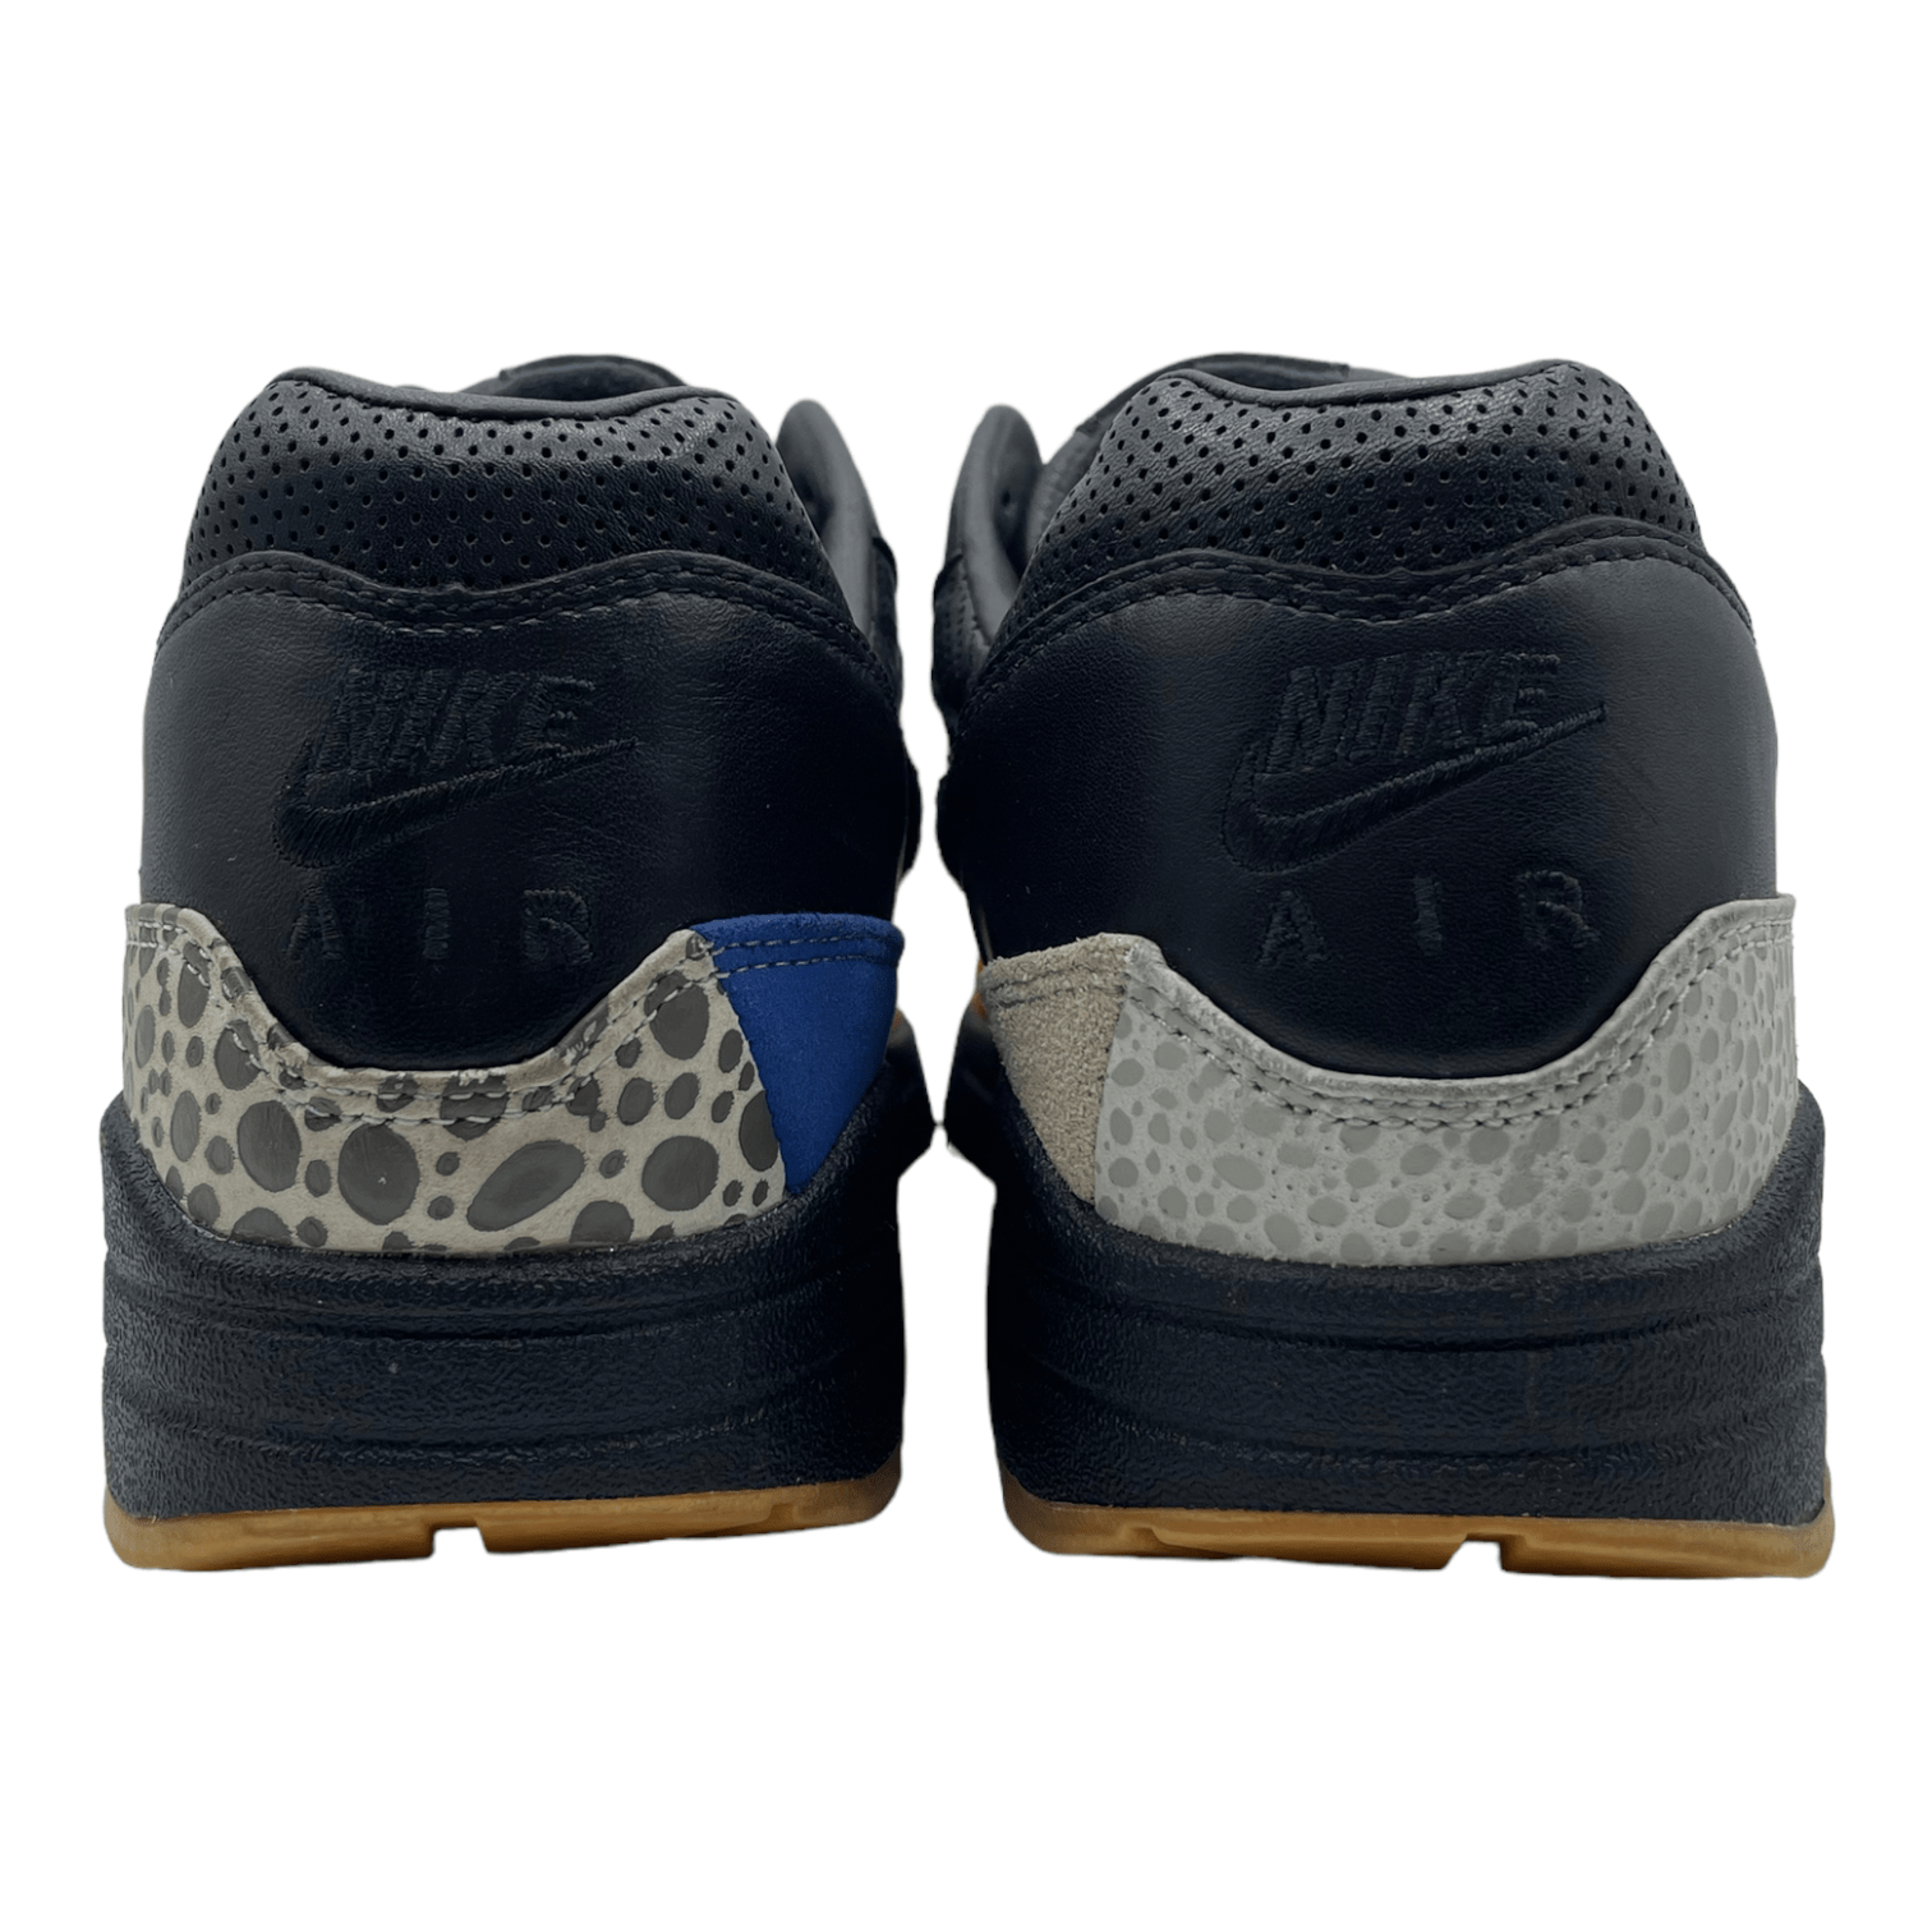 Alternate View 6 of Nike Air Max 1 Master Pre-Owned